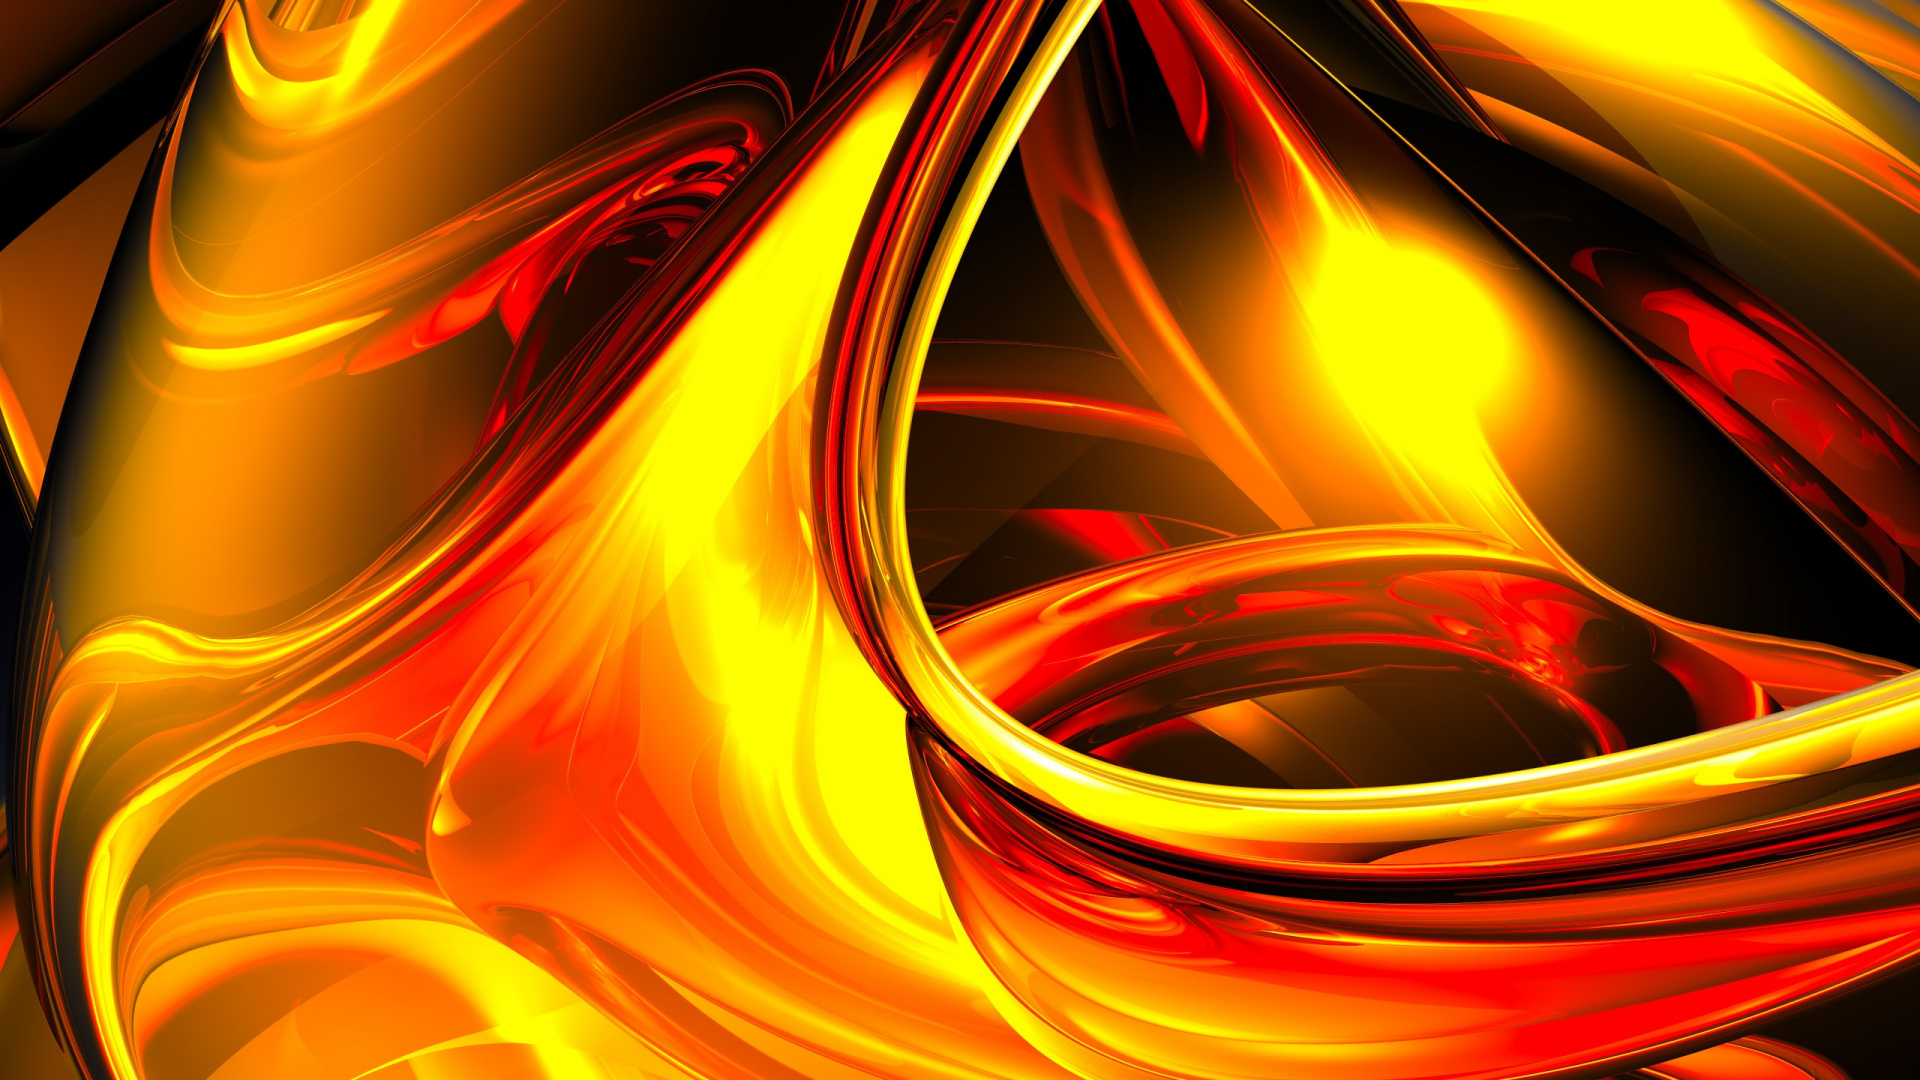 Red and Yellow Abstract Painting. Wallpaper in 1920x1080 Resolution